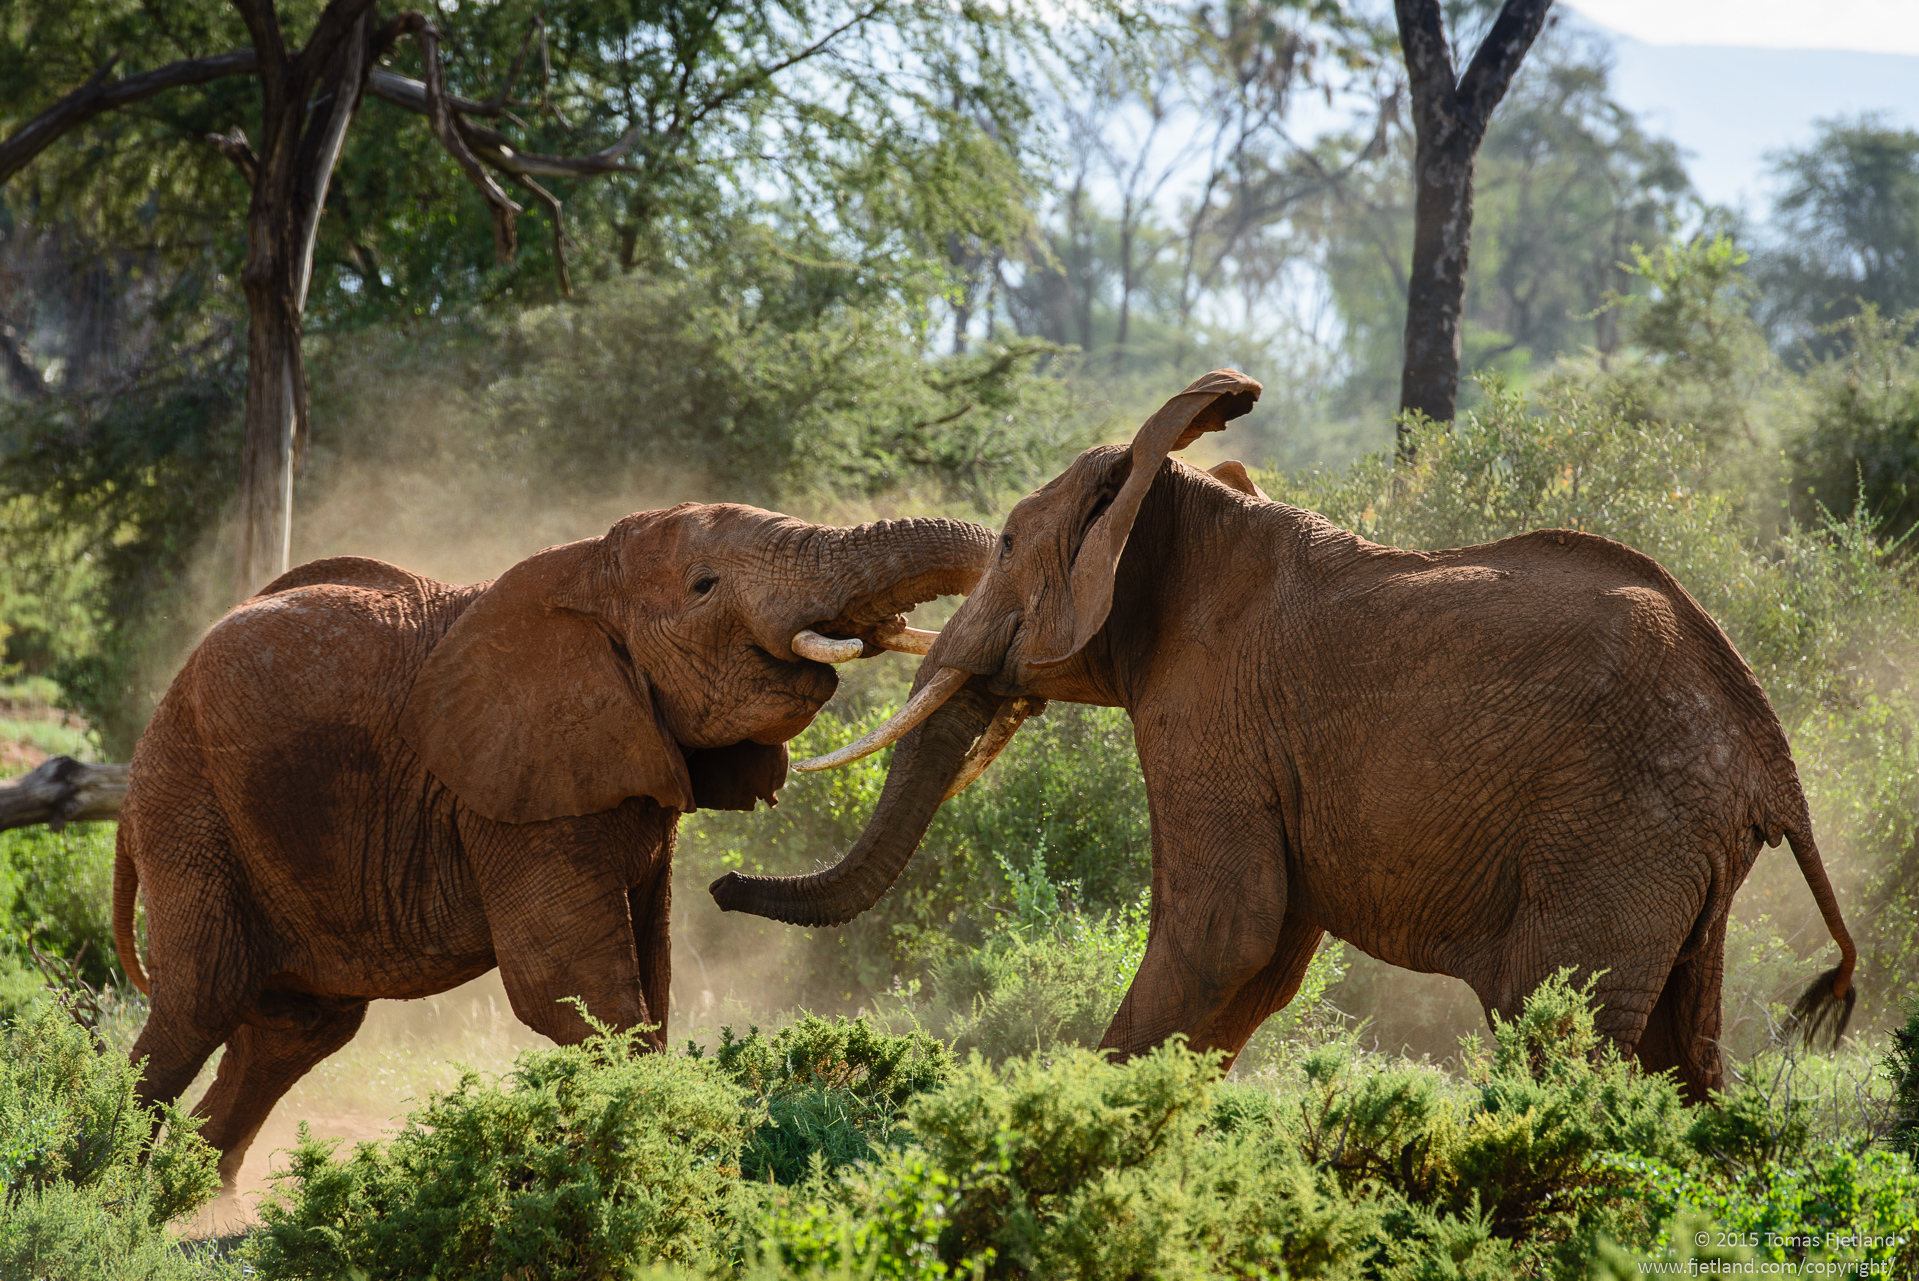 Two Elephant bulls in a fight.